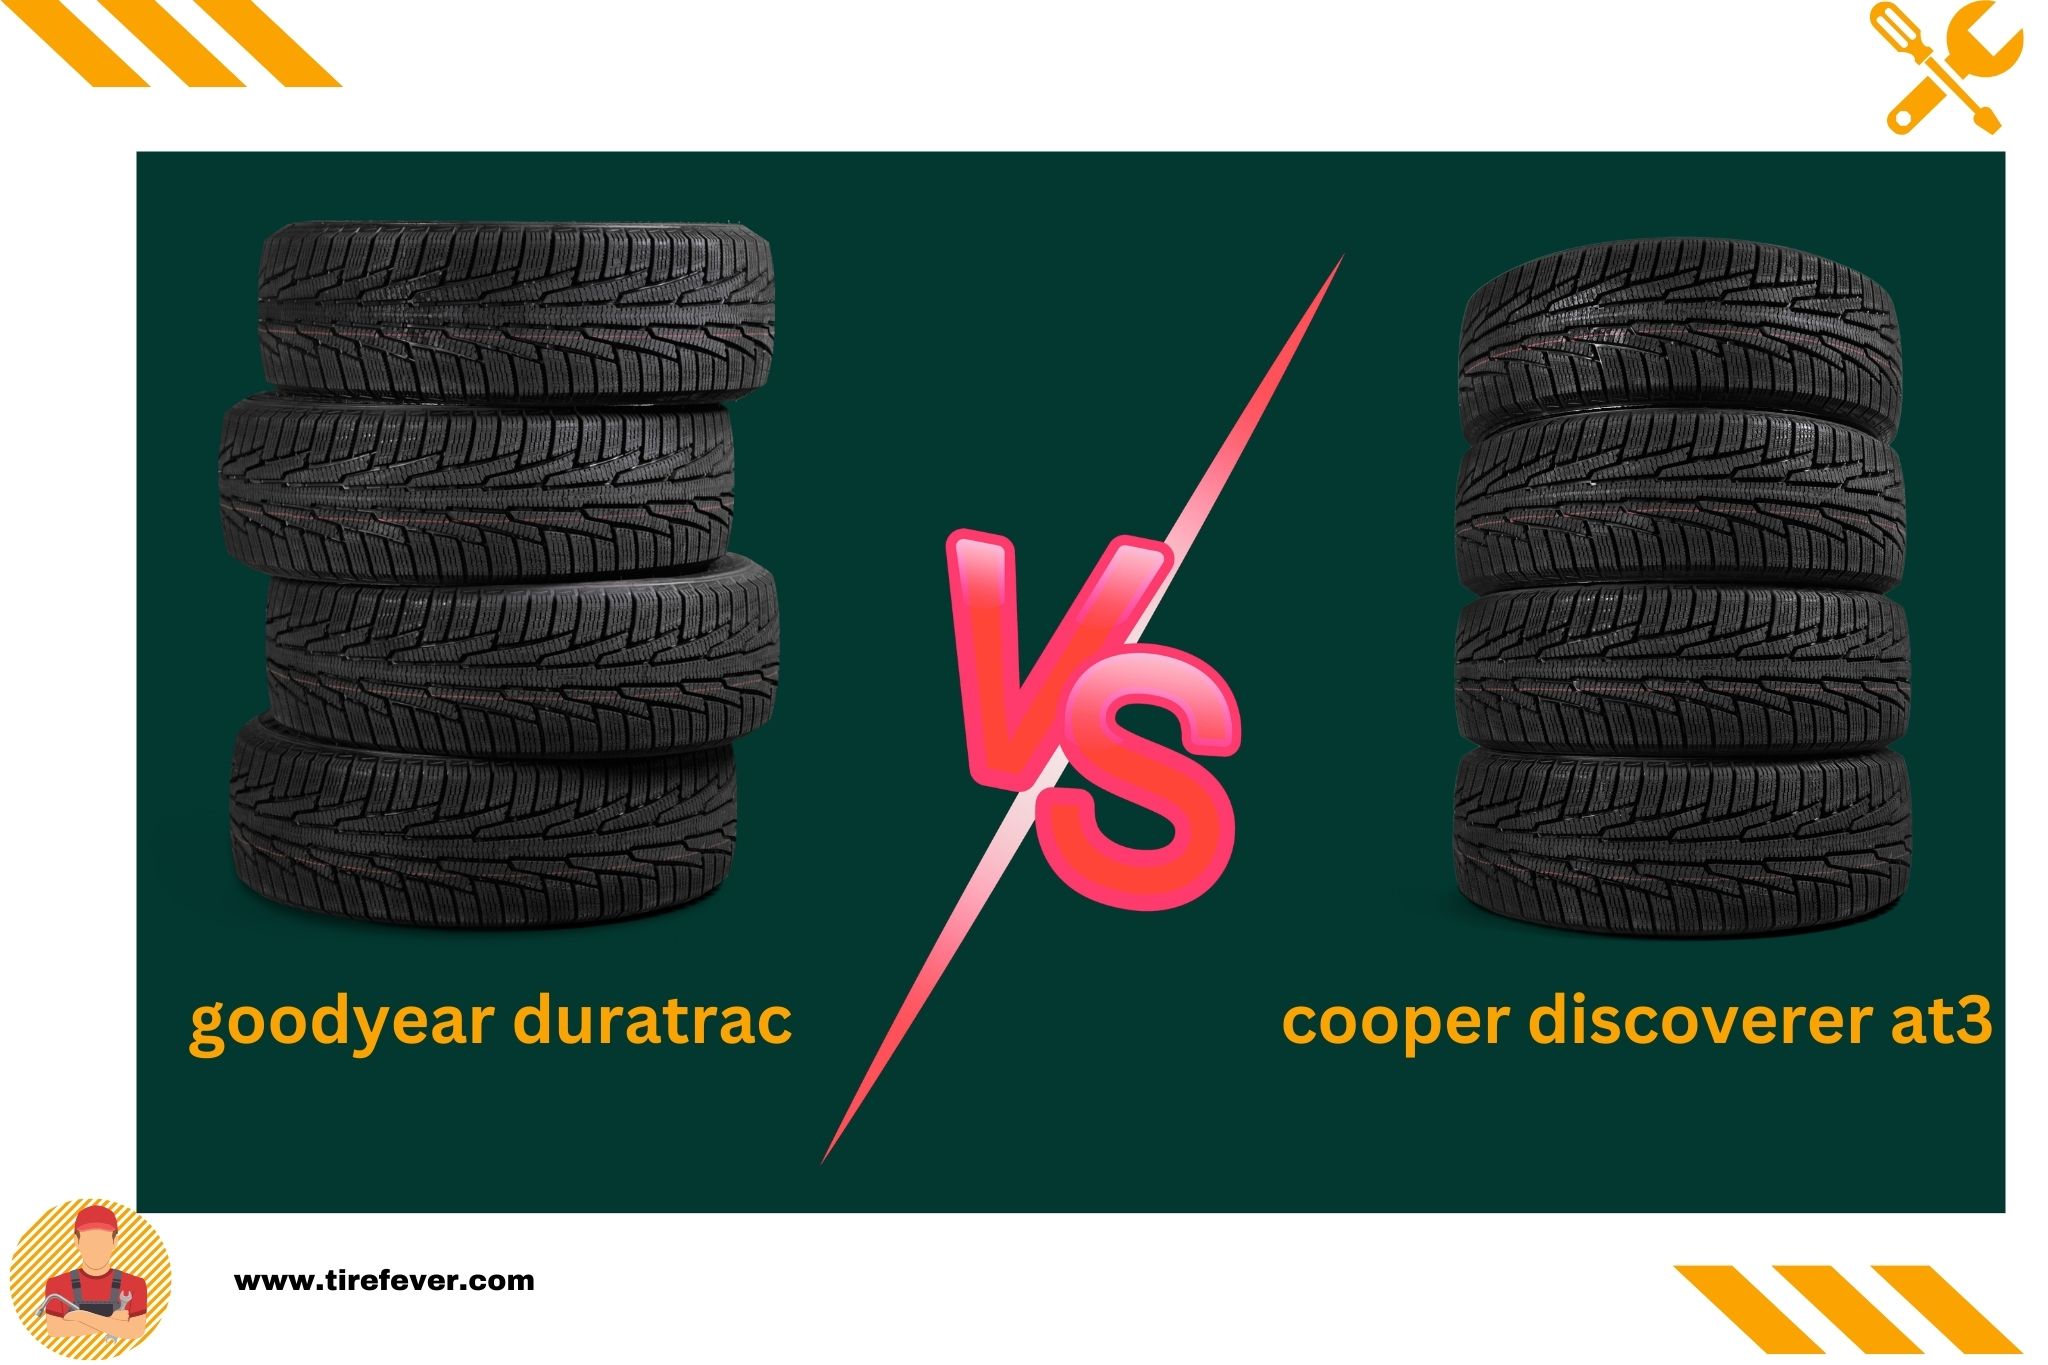 goodyear duratrac vs cooper discoverer at3